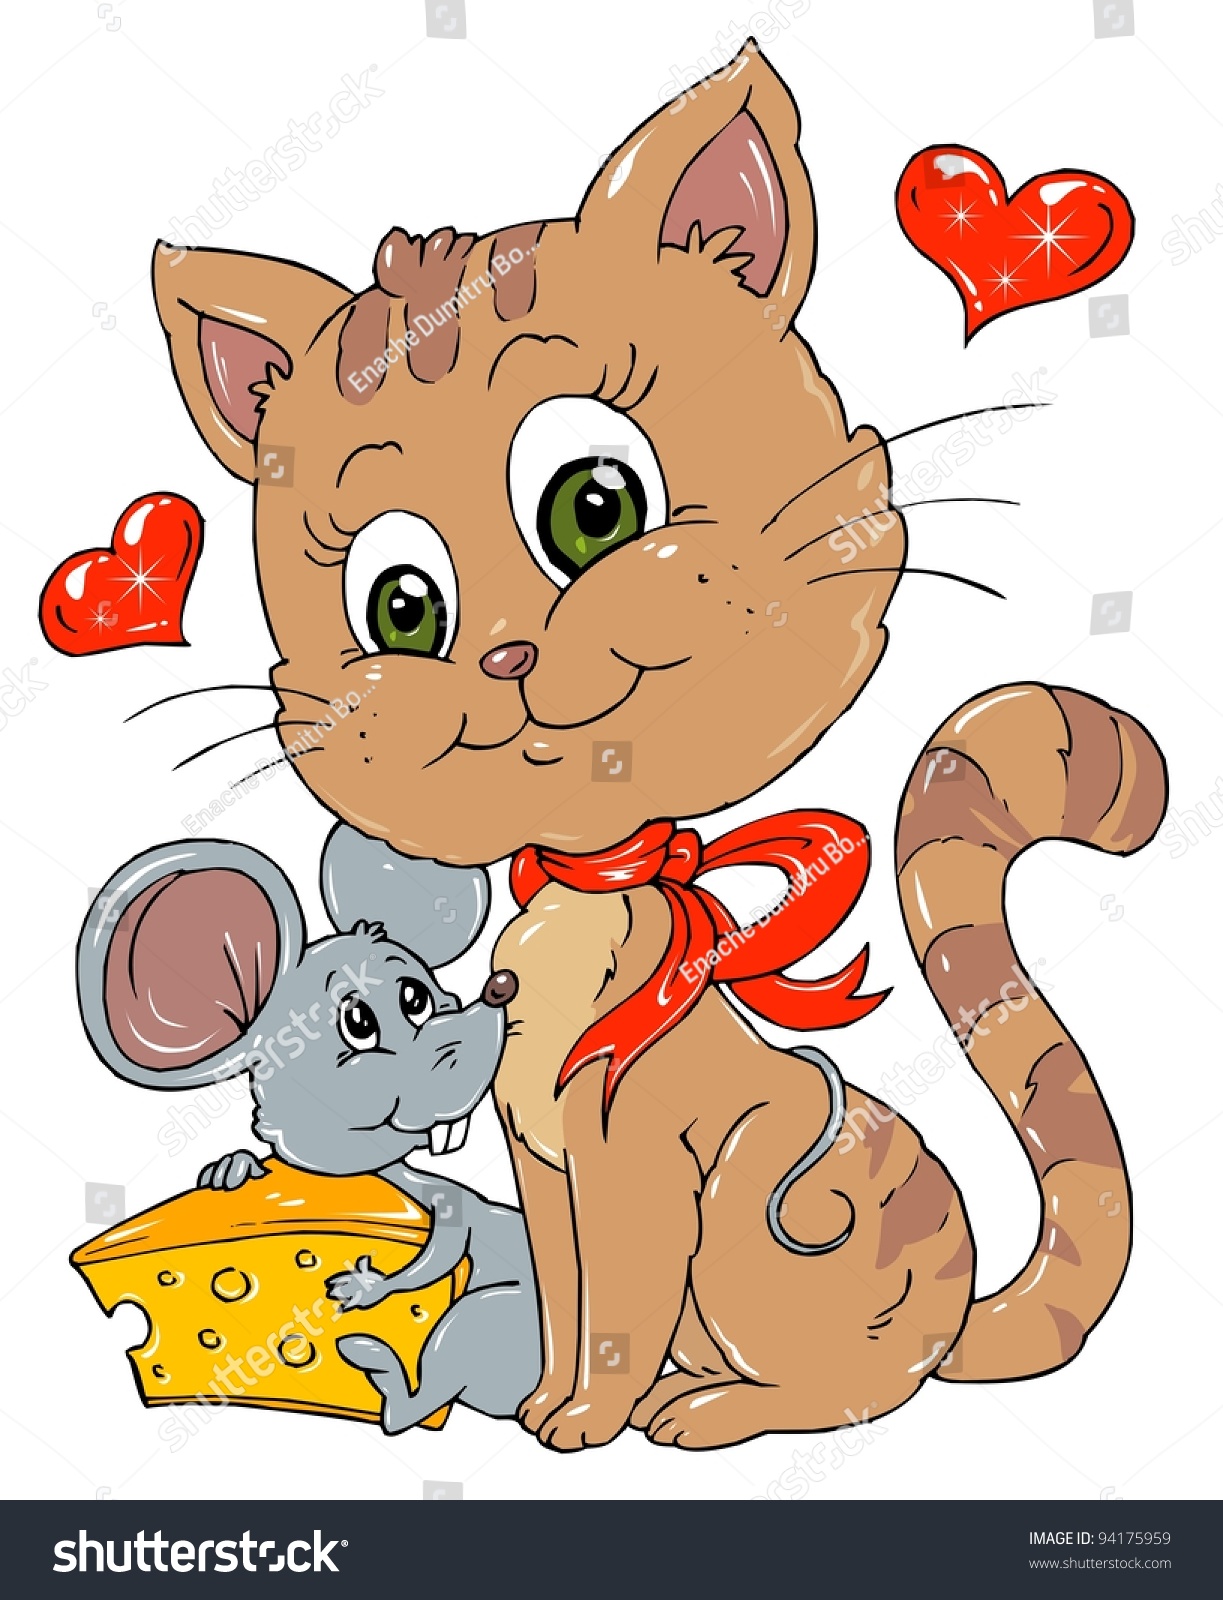 Friends Mouse Cat Illustration Vector Simple Stock Vector Royalty Free